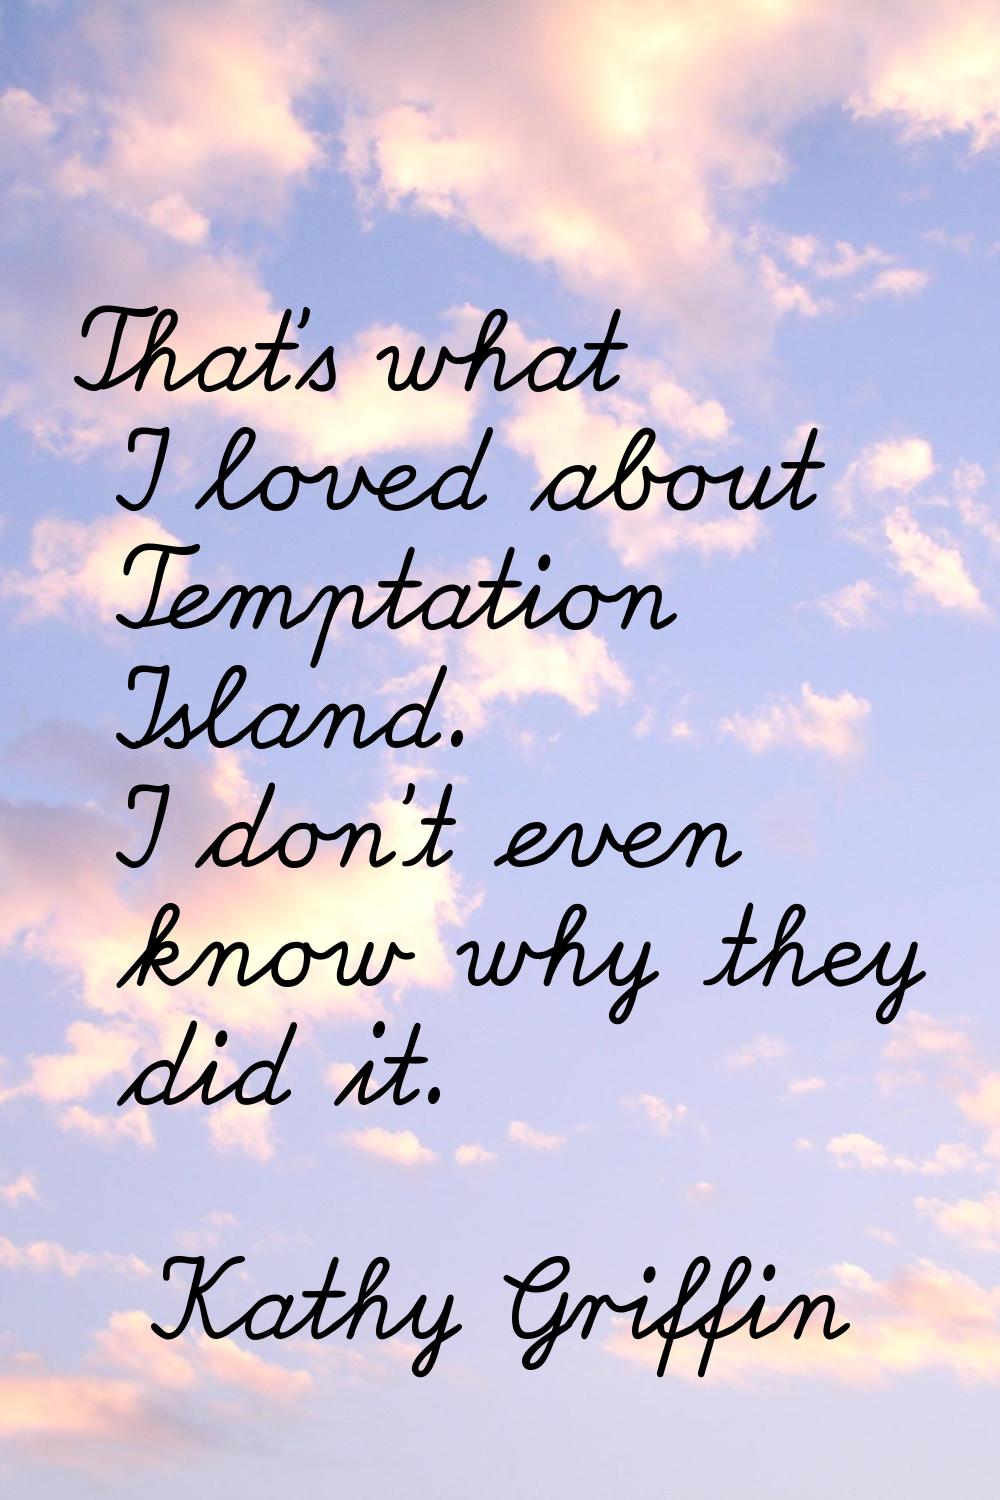 That's what I loved about Temptation Island. I don't even know why they did it.